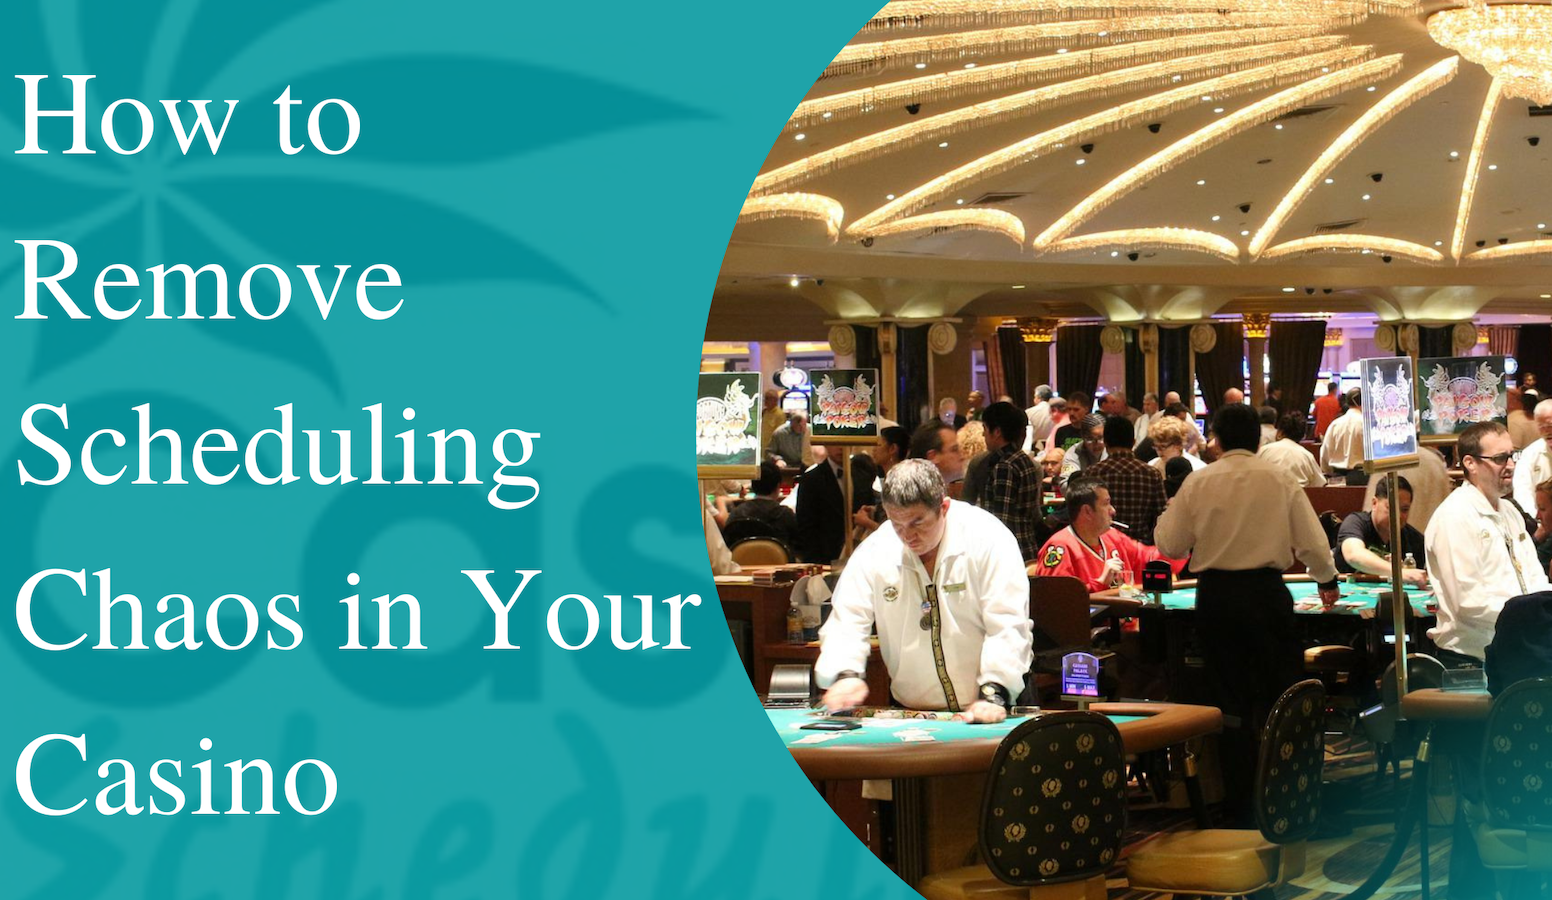 How to Remove Scheduling Chaos in Your Casino